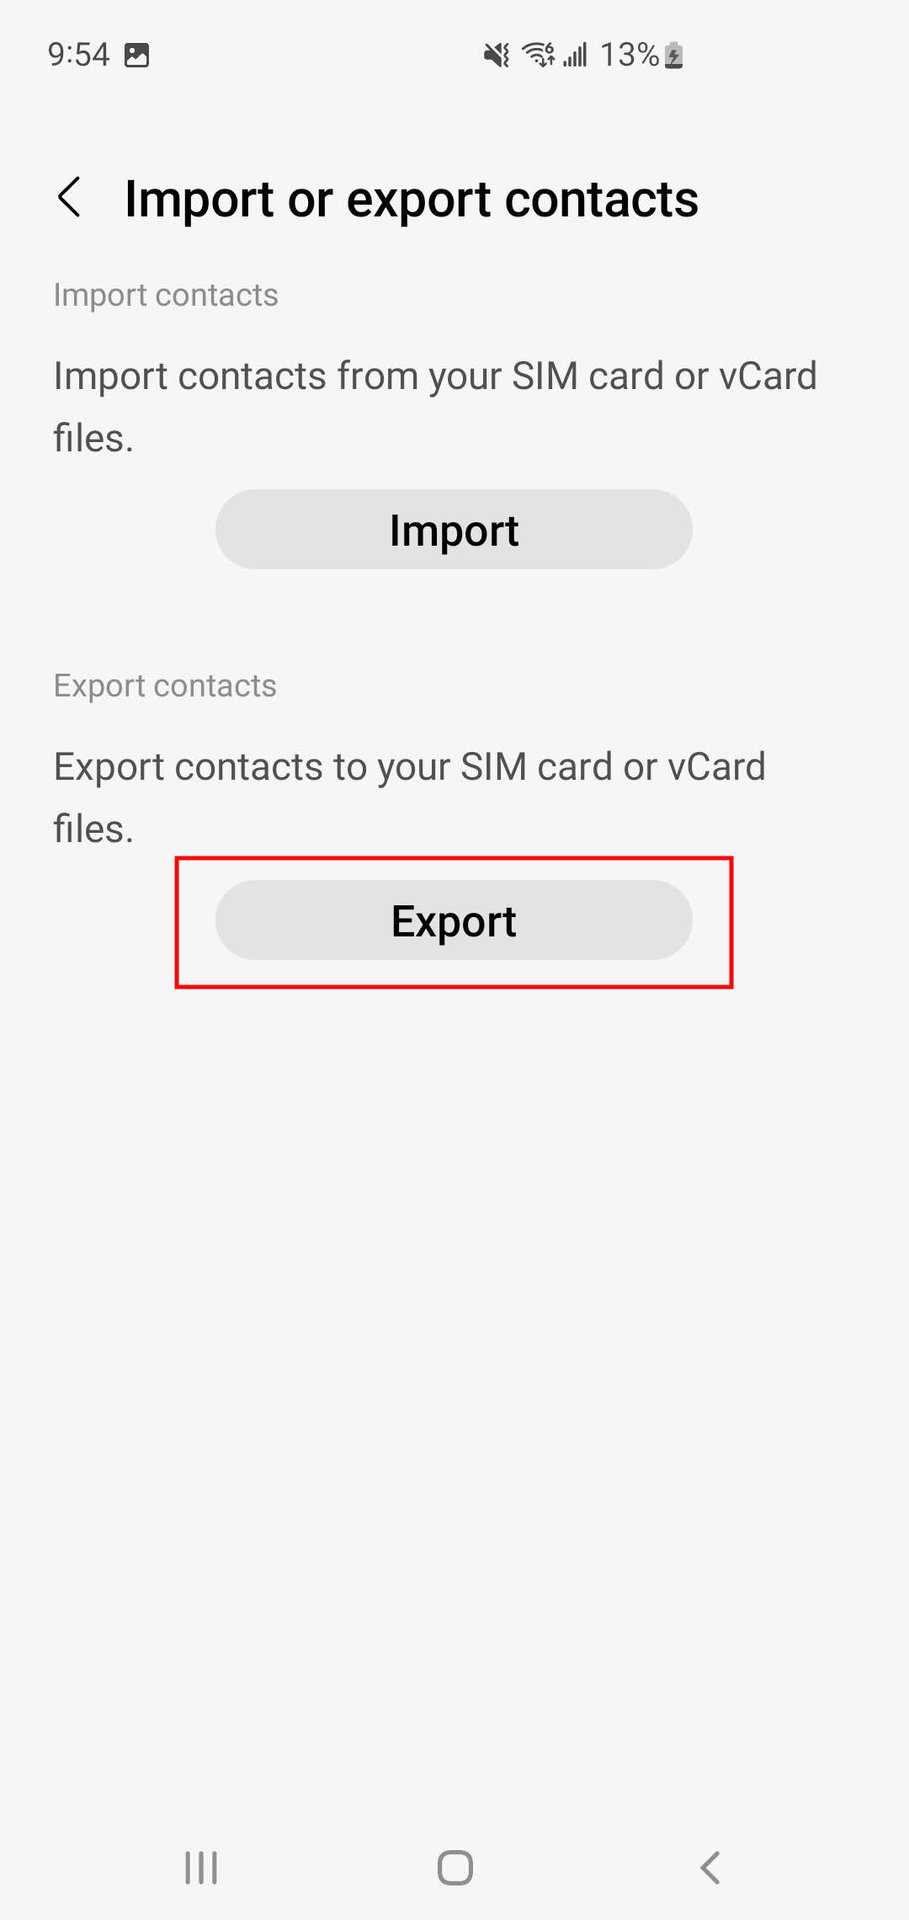 How to export contacts to your SIM card on a Samsung phone 4